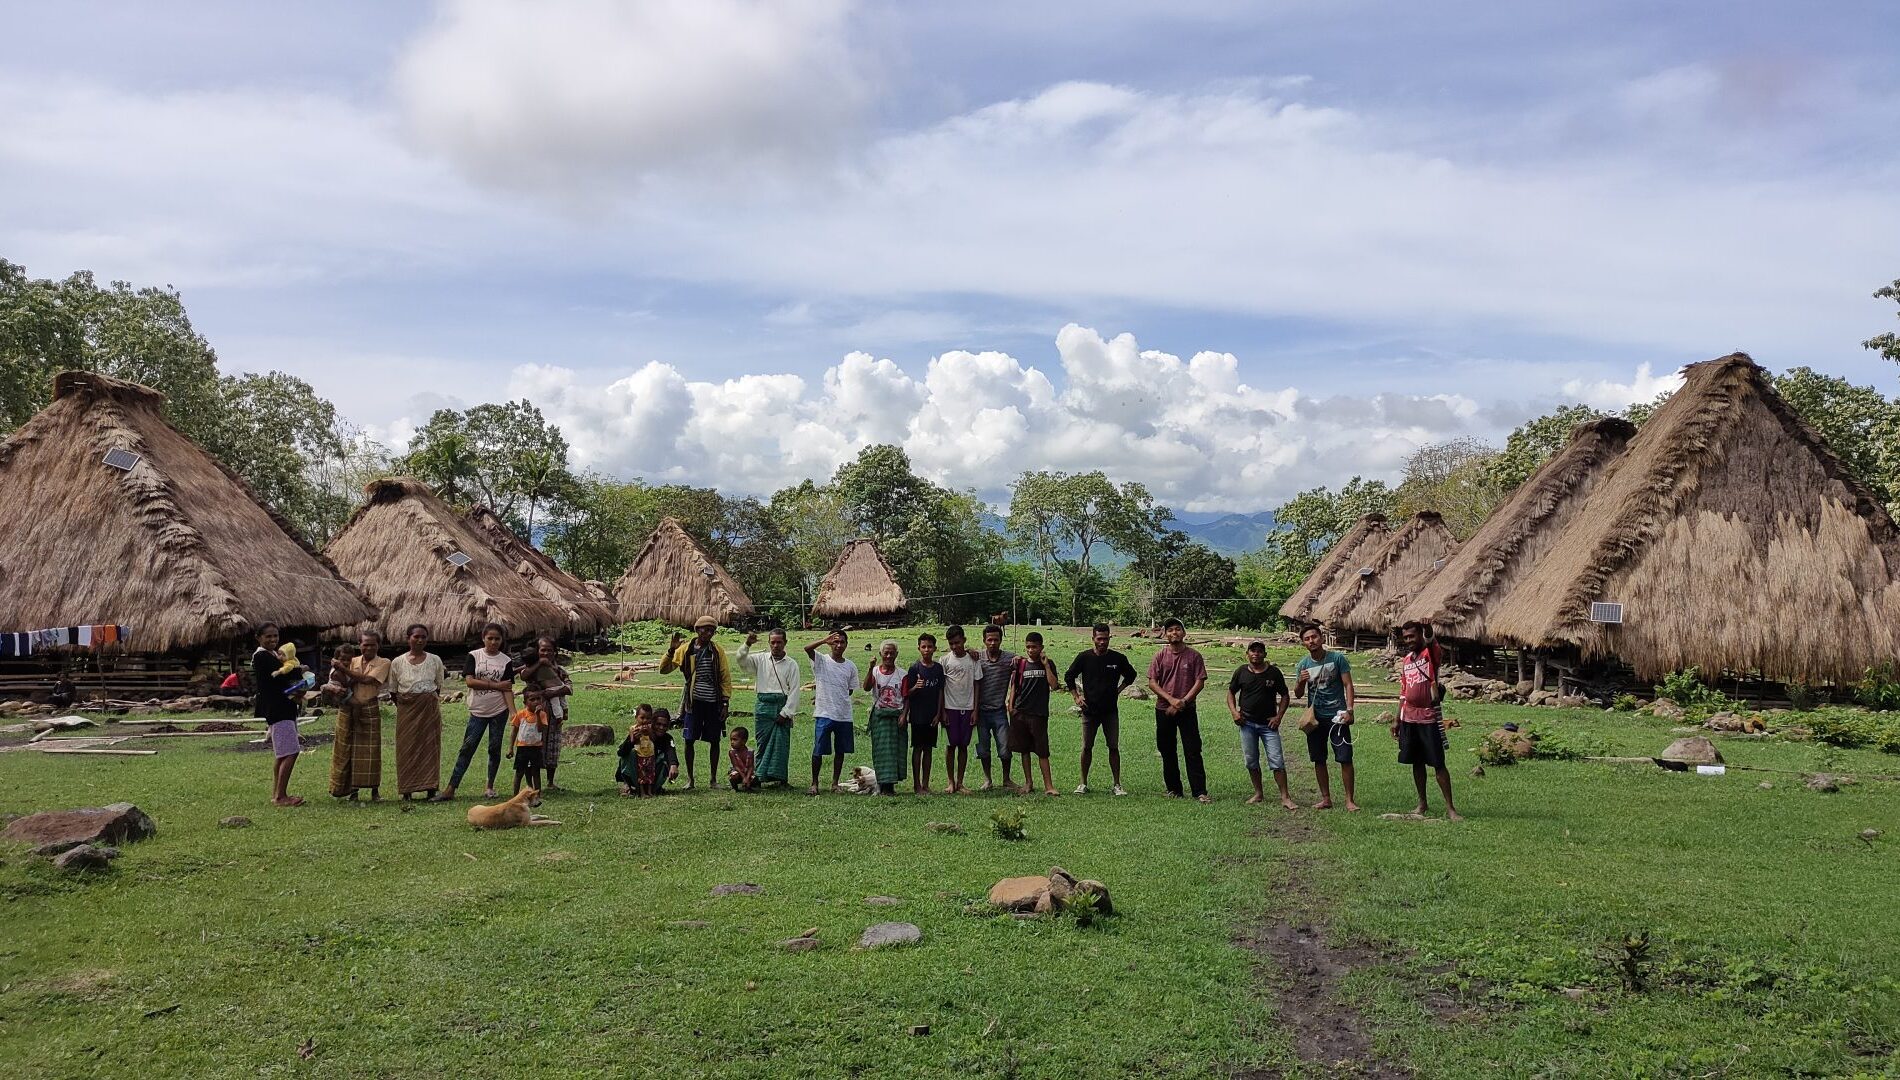 Several people standing in Kawa village on Flores island in Indonesia